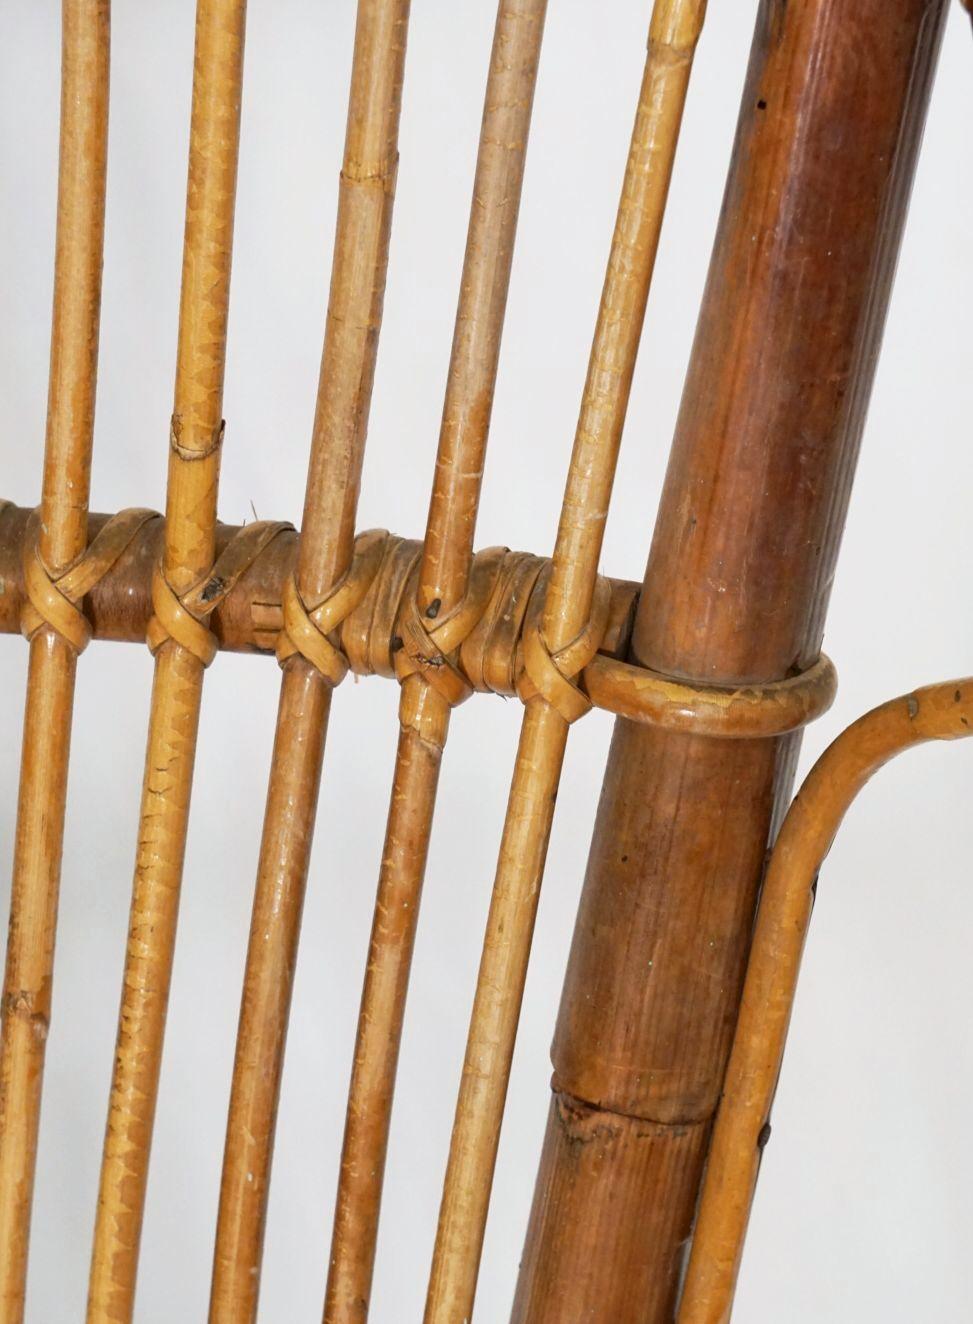 Italian Fan-Backed Arm Chairs of Rattan and Bamboo from the Mid-20th Century For Sale 13